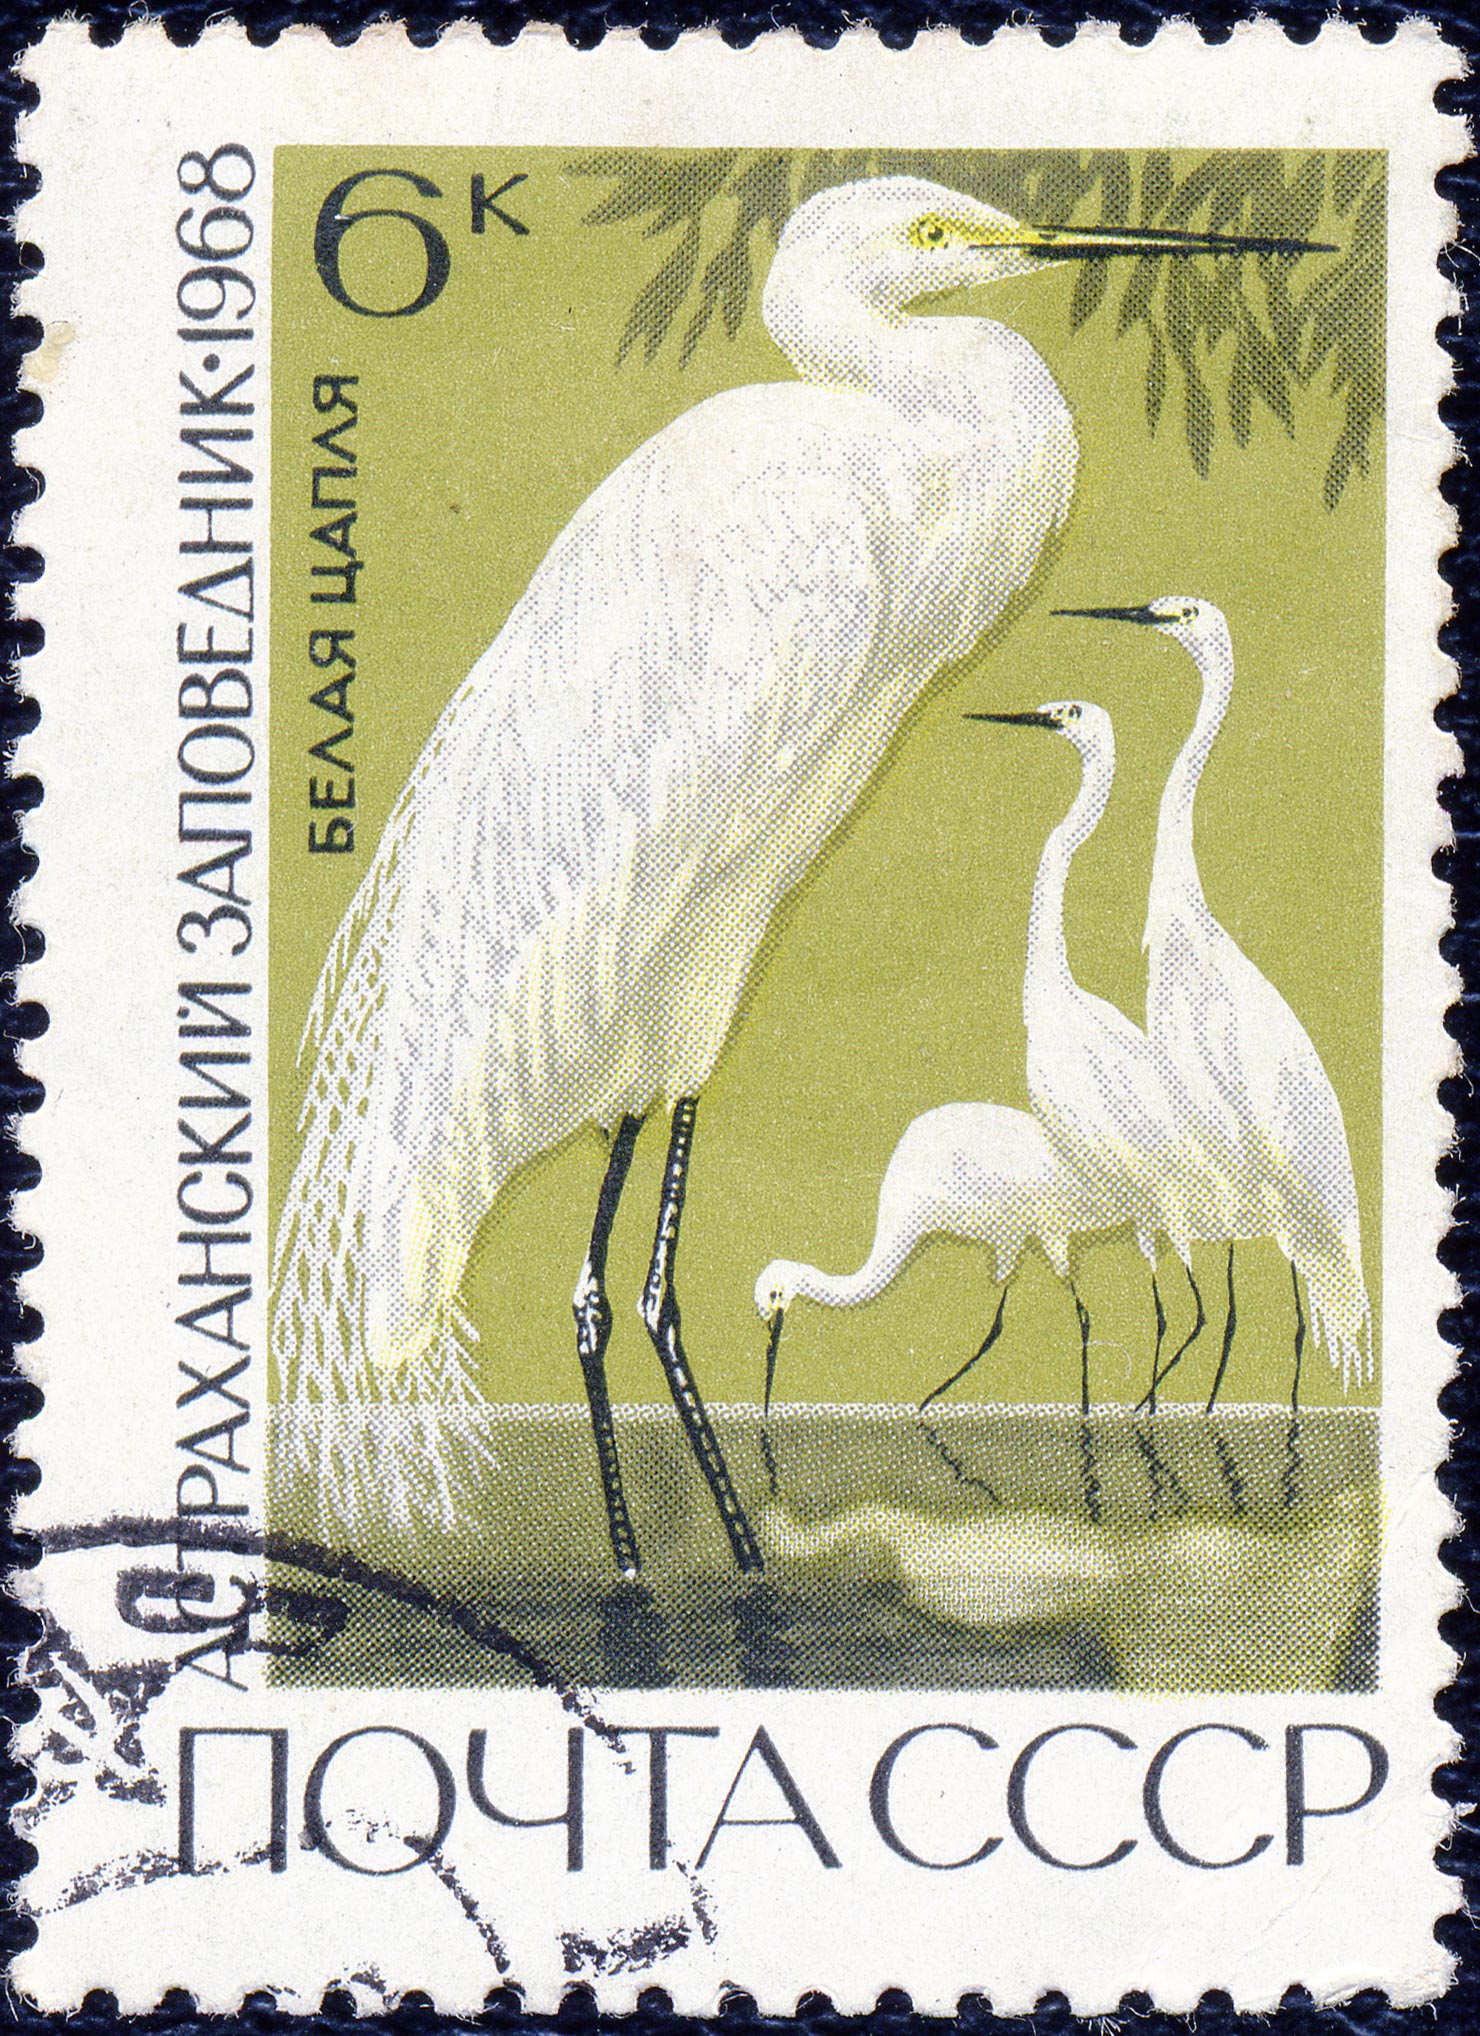 The Soviet Union 1968 CPA 3675 stamp (Great White Egrets (Astrakhan Nature Reserve)) cancelled light